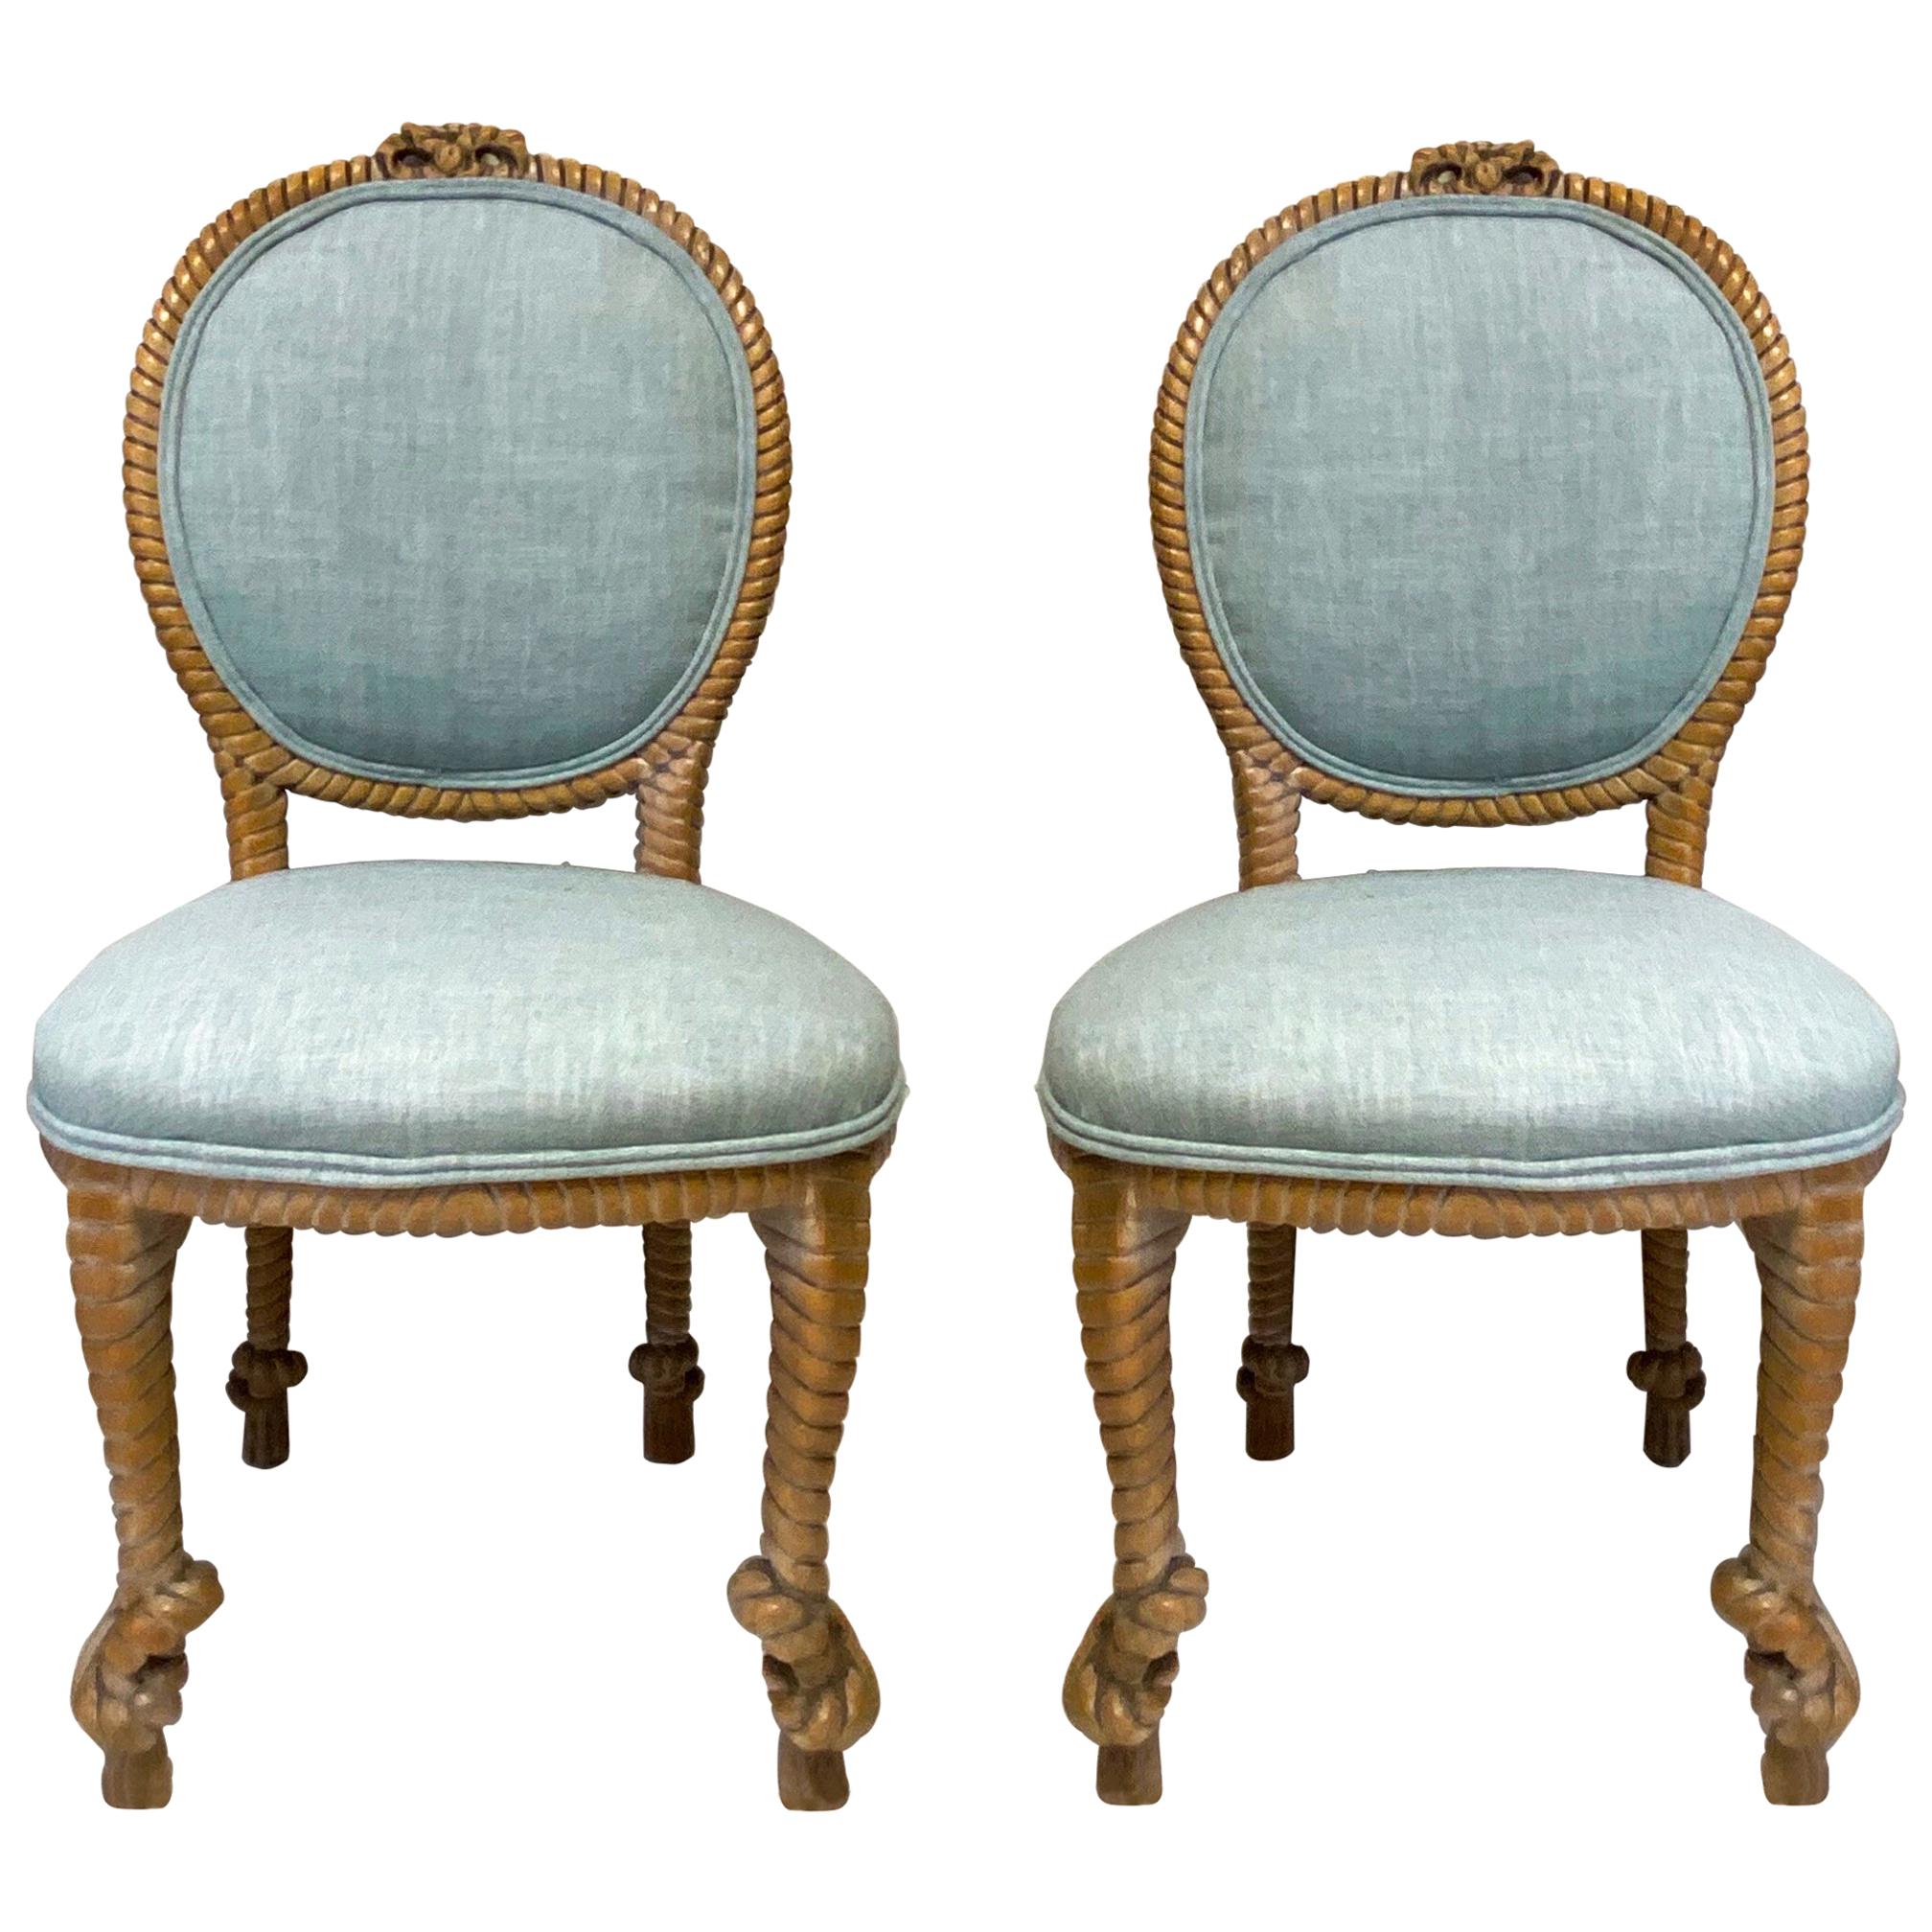 1960s Regency Style Carved Oak Rope Side Chairs by Baker Furniture, a Pair